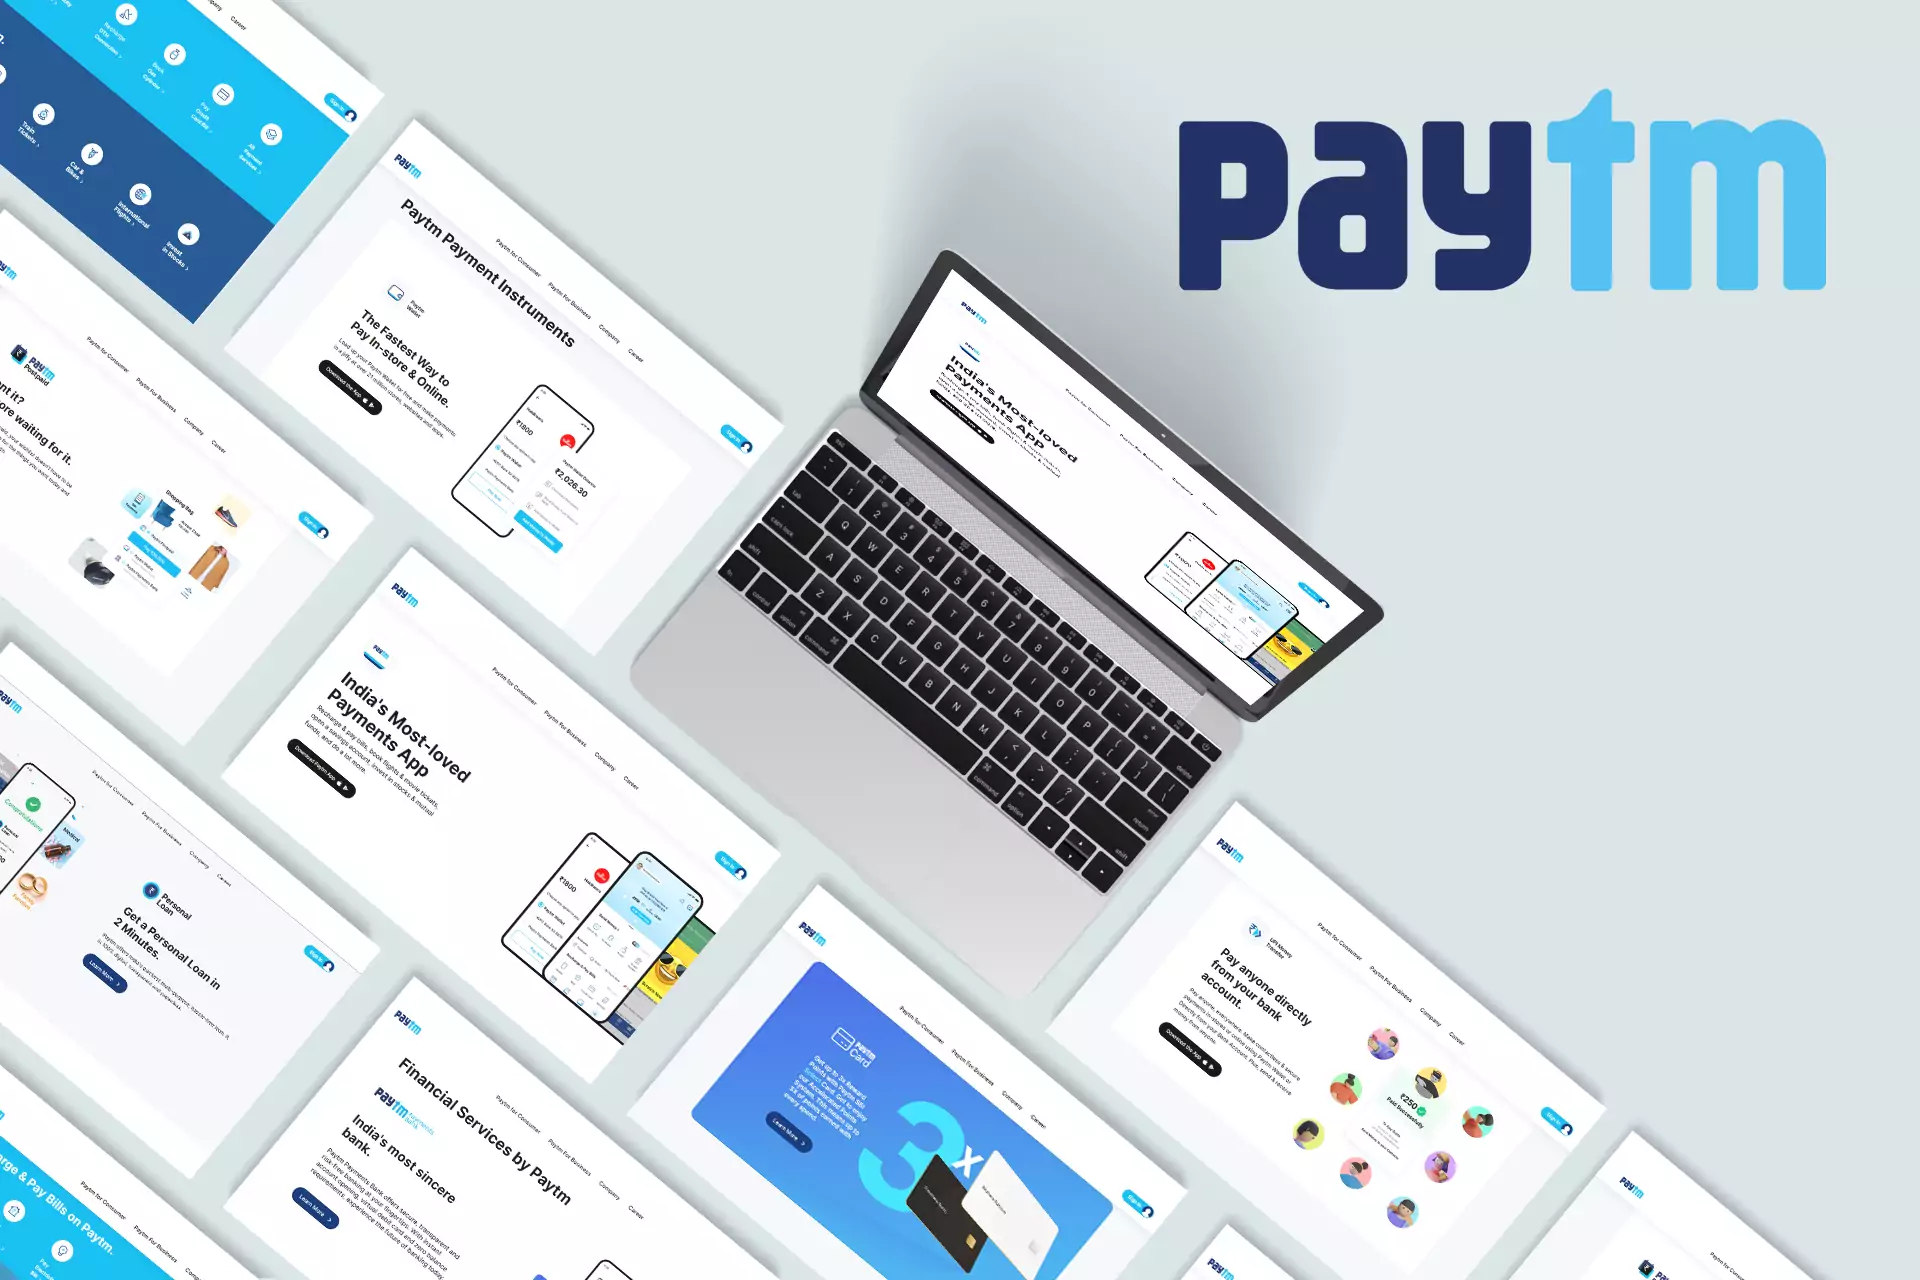 PayTm is an online payment platform that helps users to pay for goods and top-up accounts including betting sites.